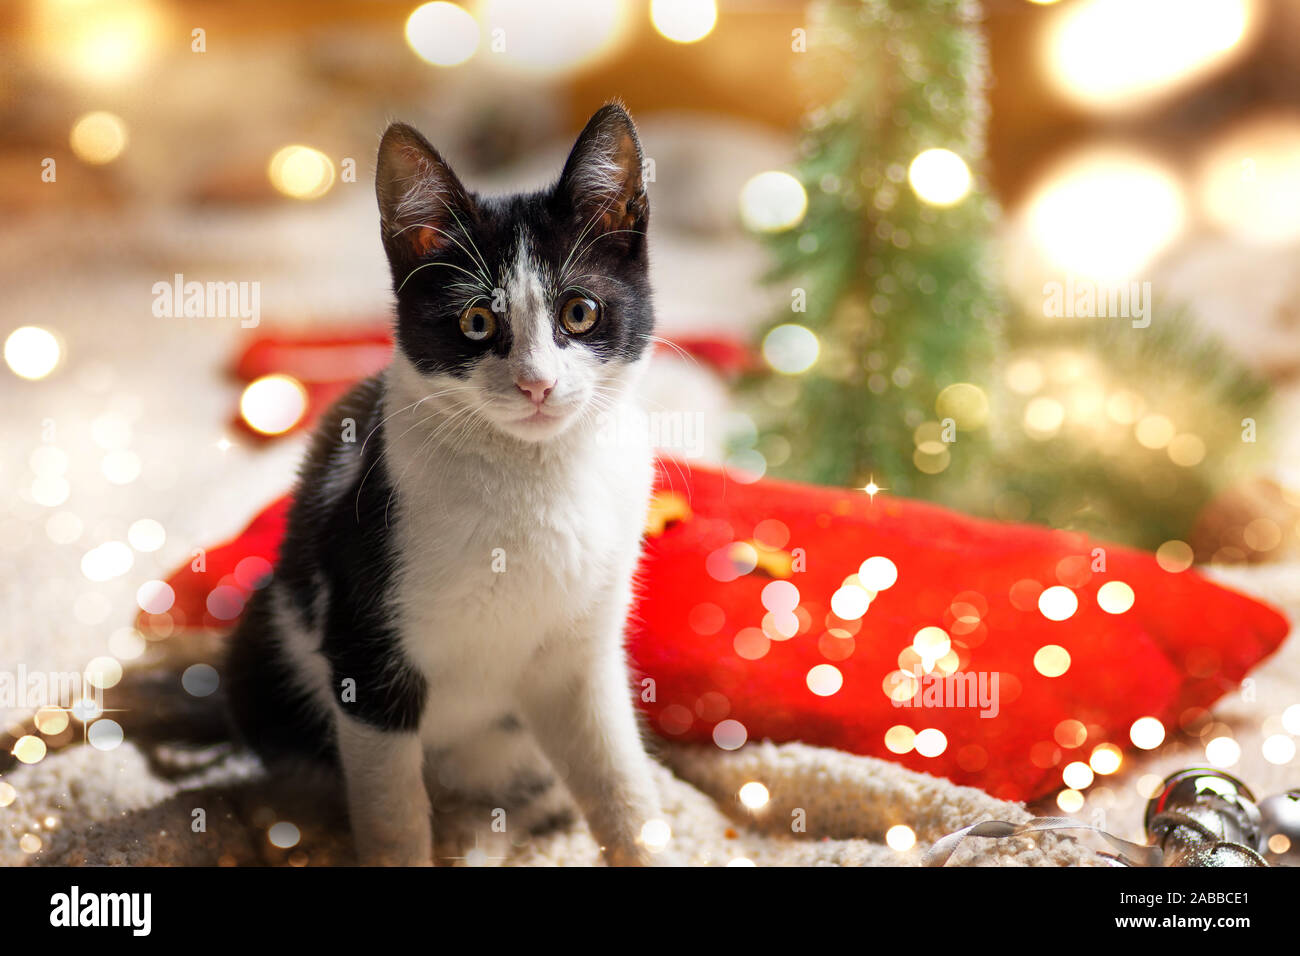 Kitty cat and festive Christmas decorations background Stock Photo